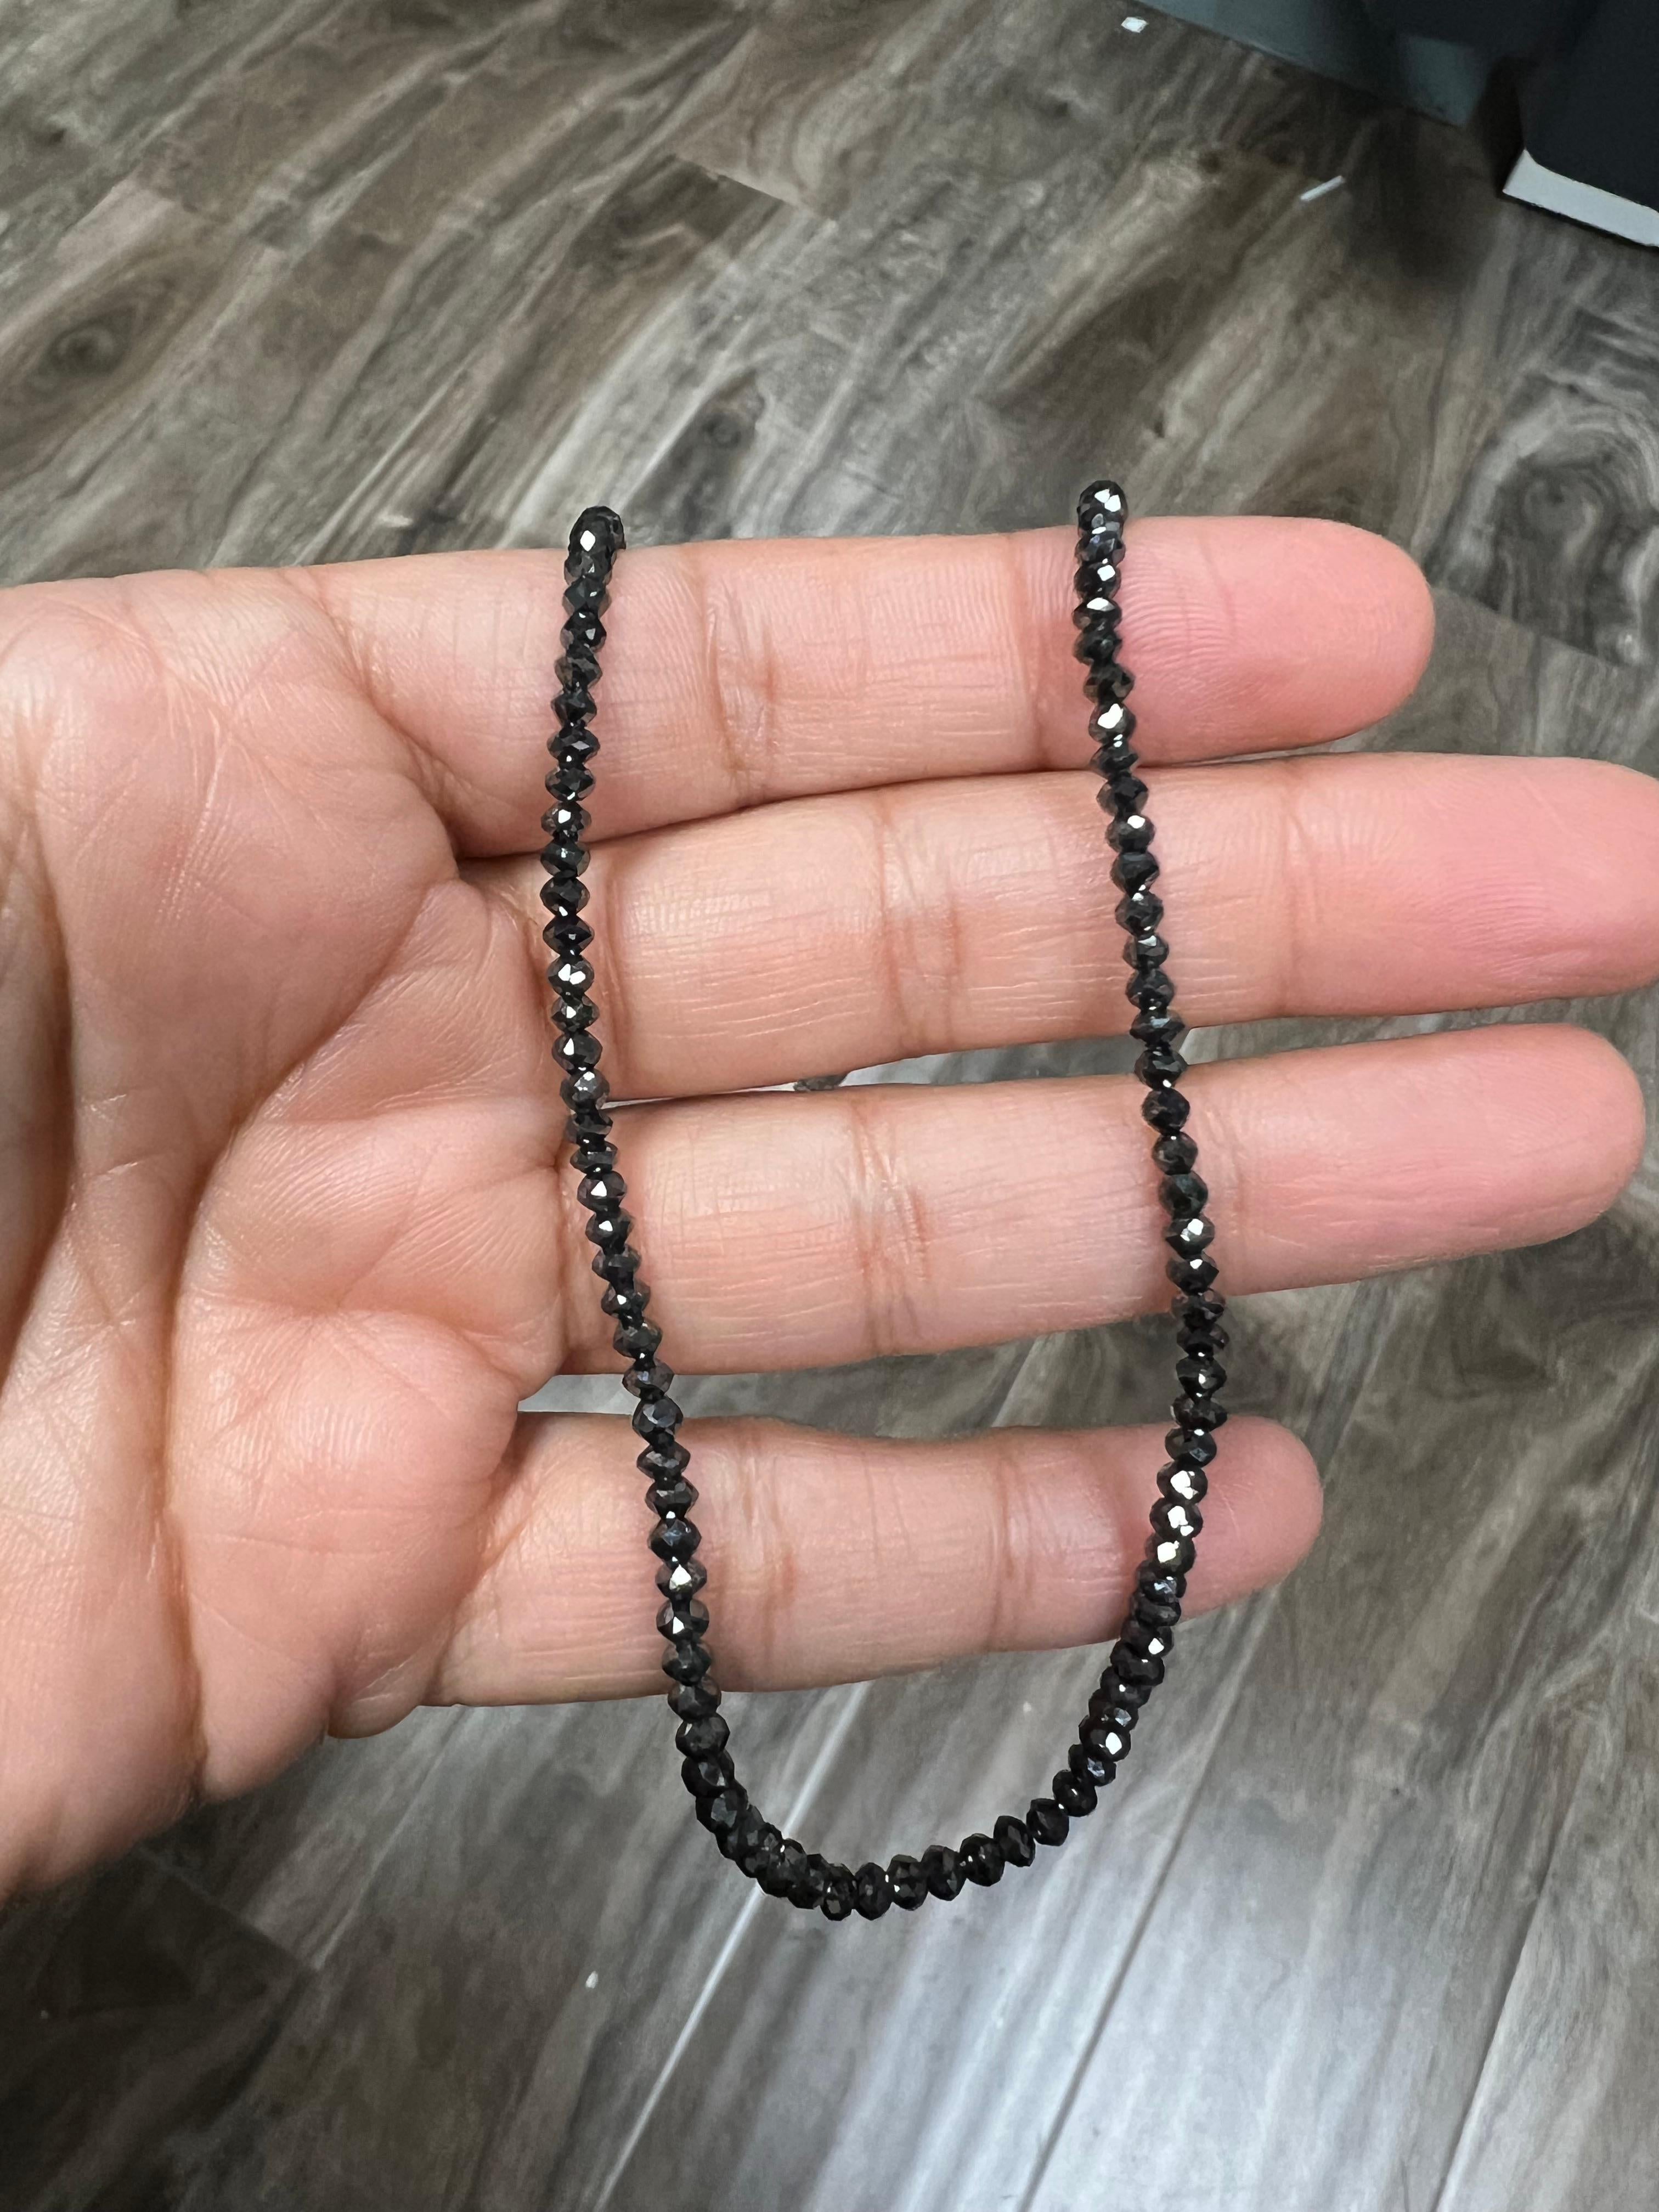 This necklace has 25.00 carats of Natural Briolette Cut Black Diamonds. 

It is approximately 16 inches in length and has a clasp made out of 18 Karat White Gold. 

The black diamonds are natural but have been color treated as per industry standards